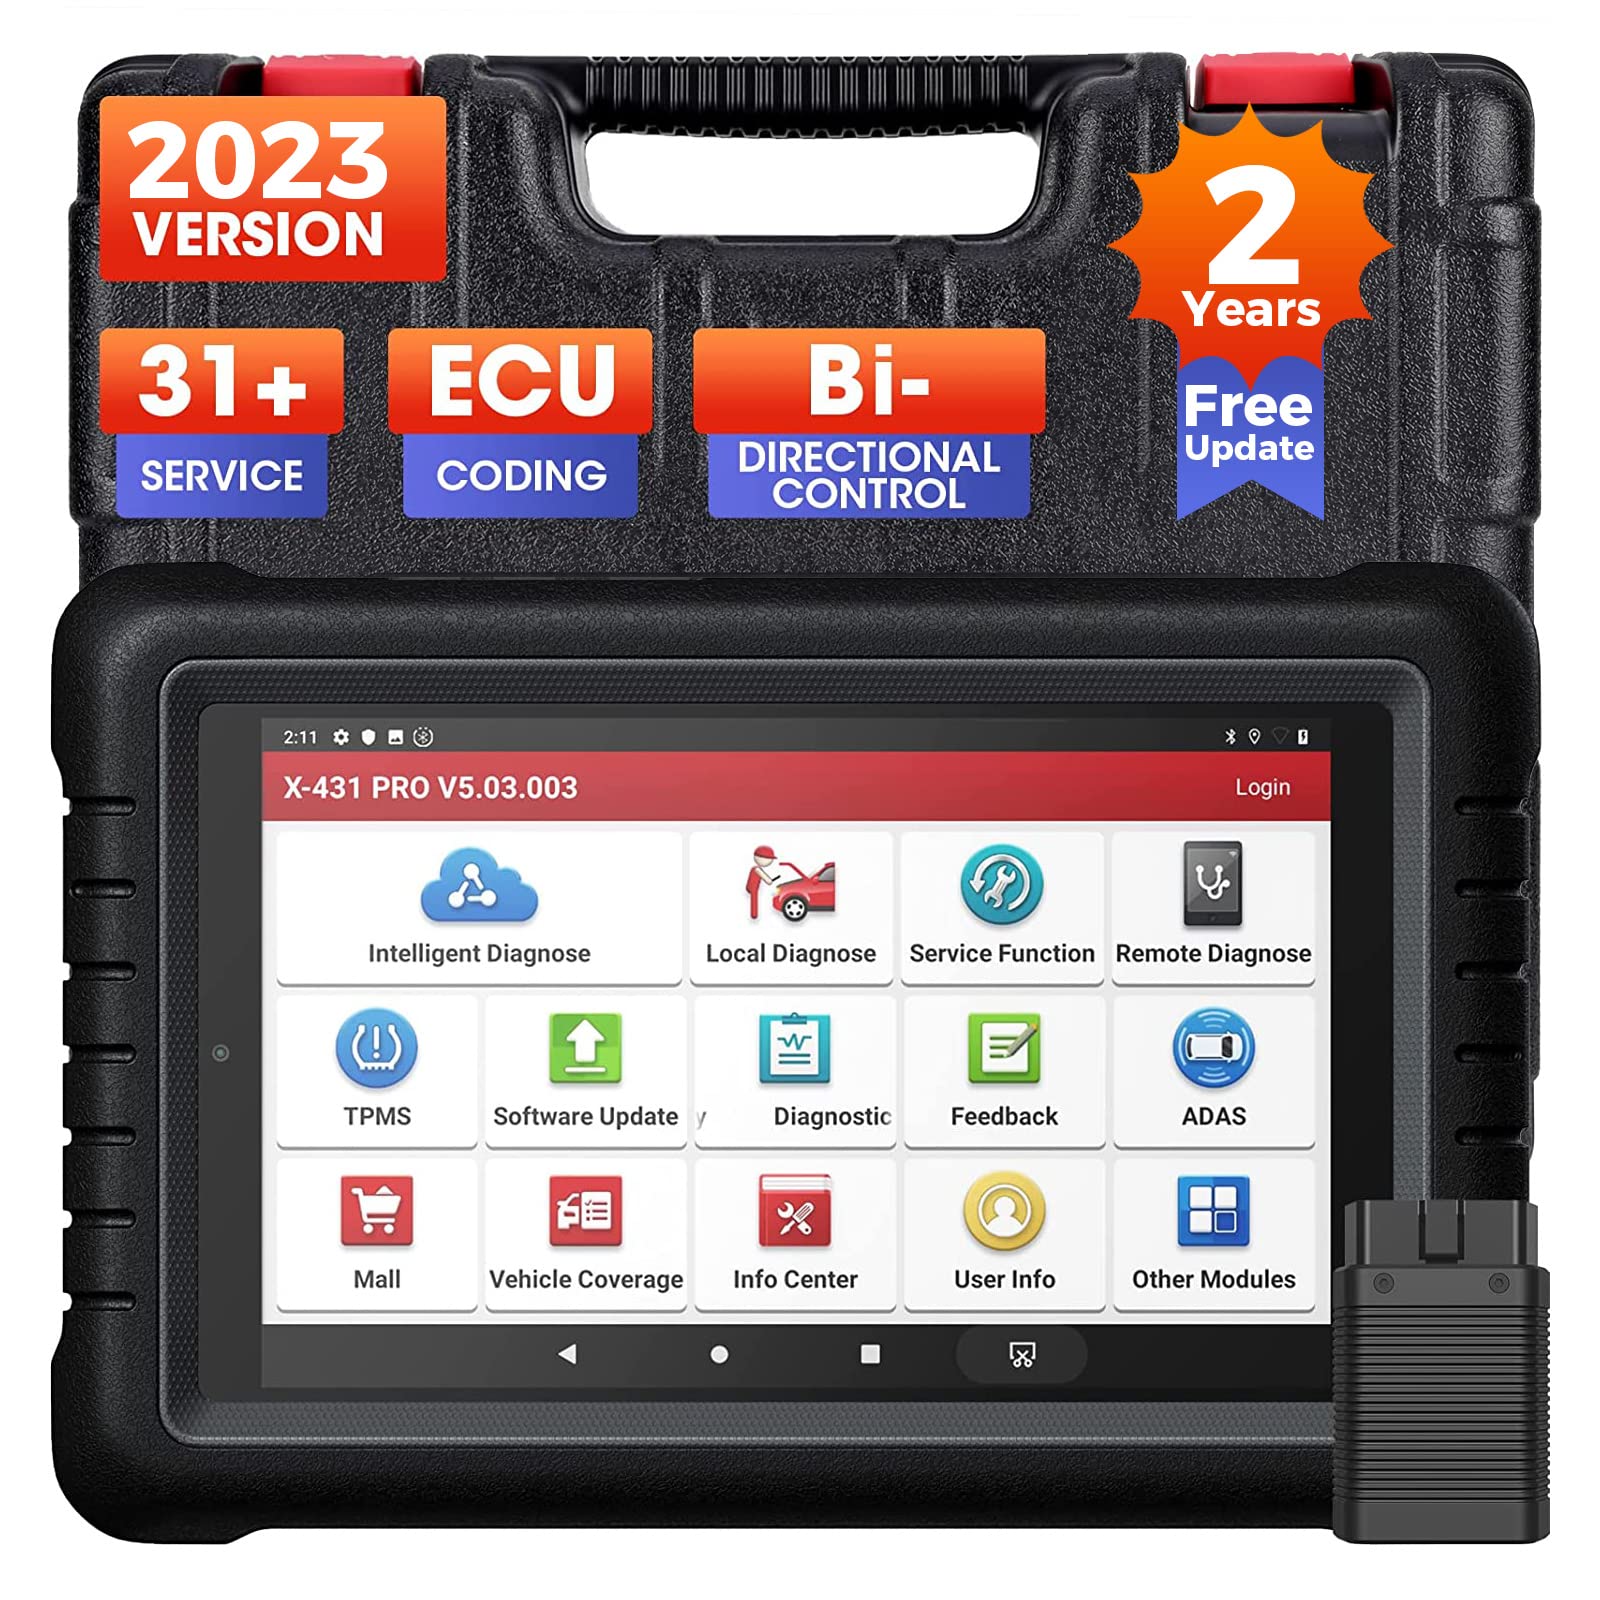 2 Years Free Update LAUNCH X431 PRO Dyno Bi-directional OBD2 Scanner  Support 37+ Special Functions C